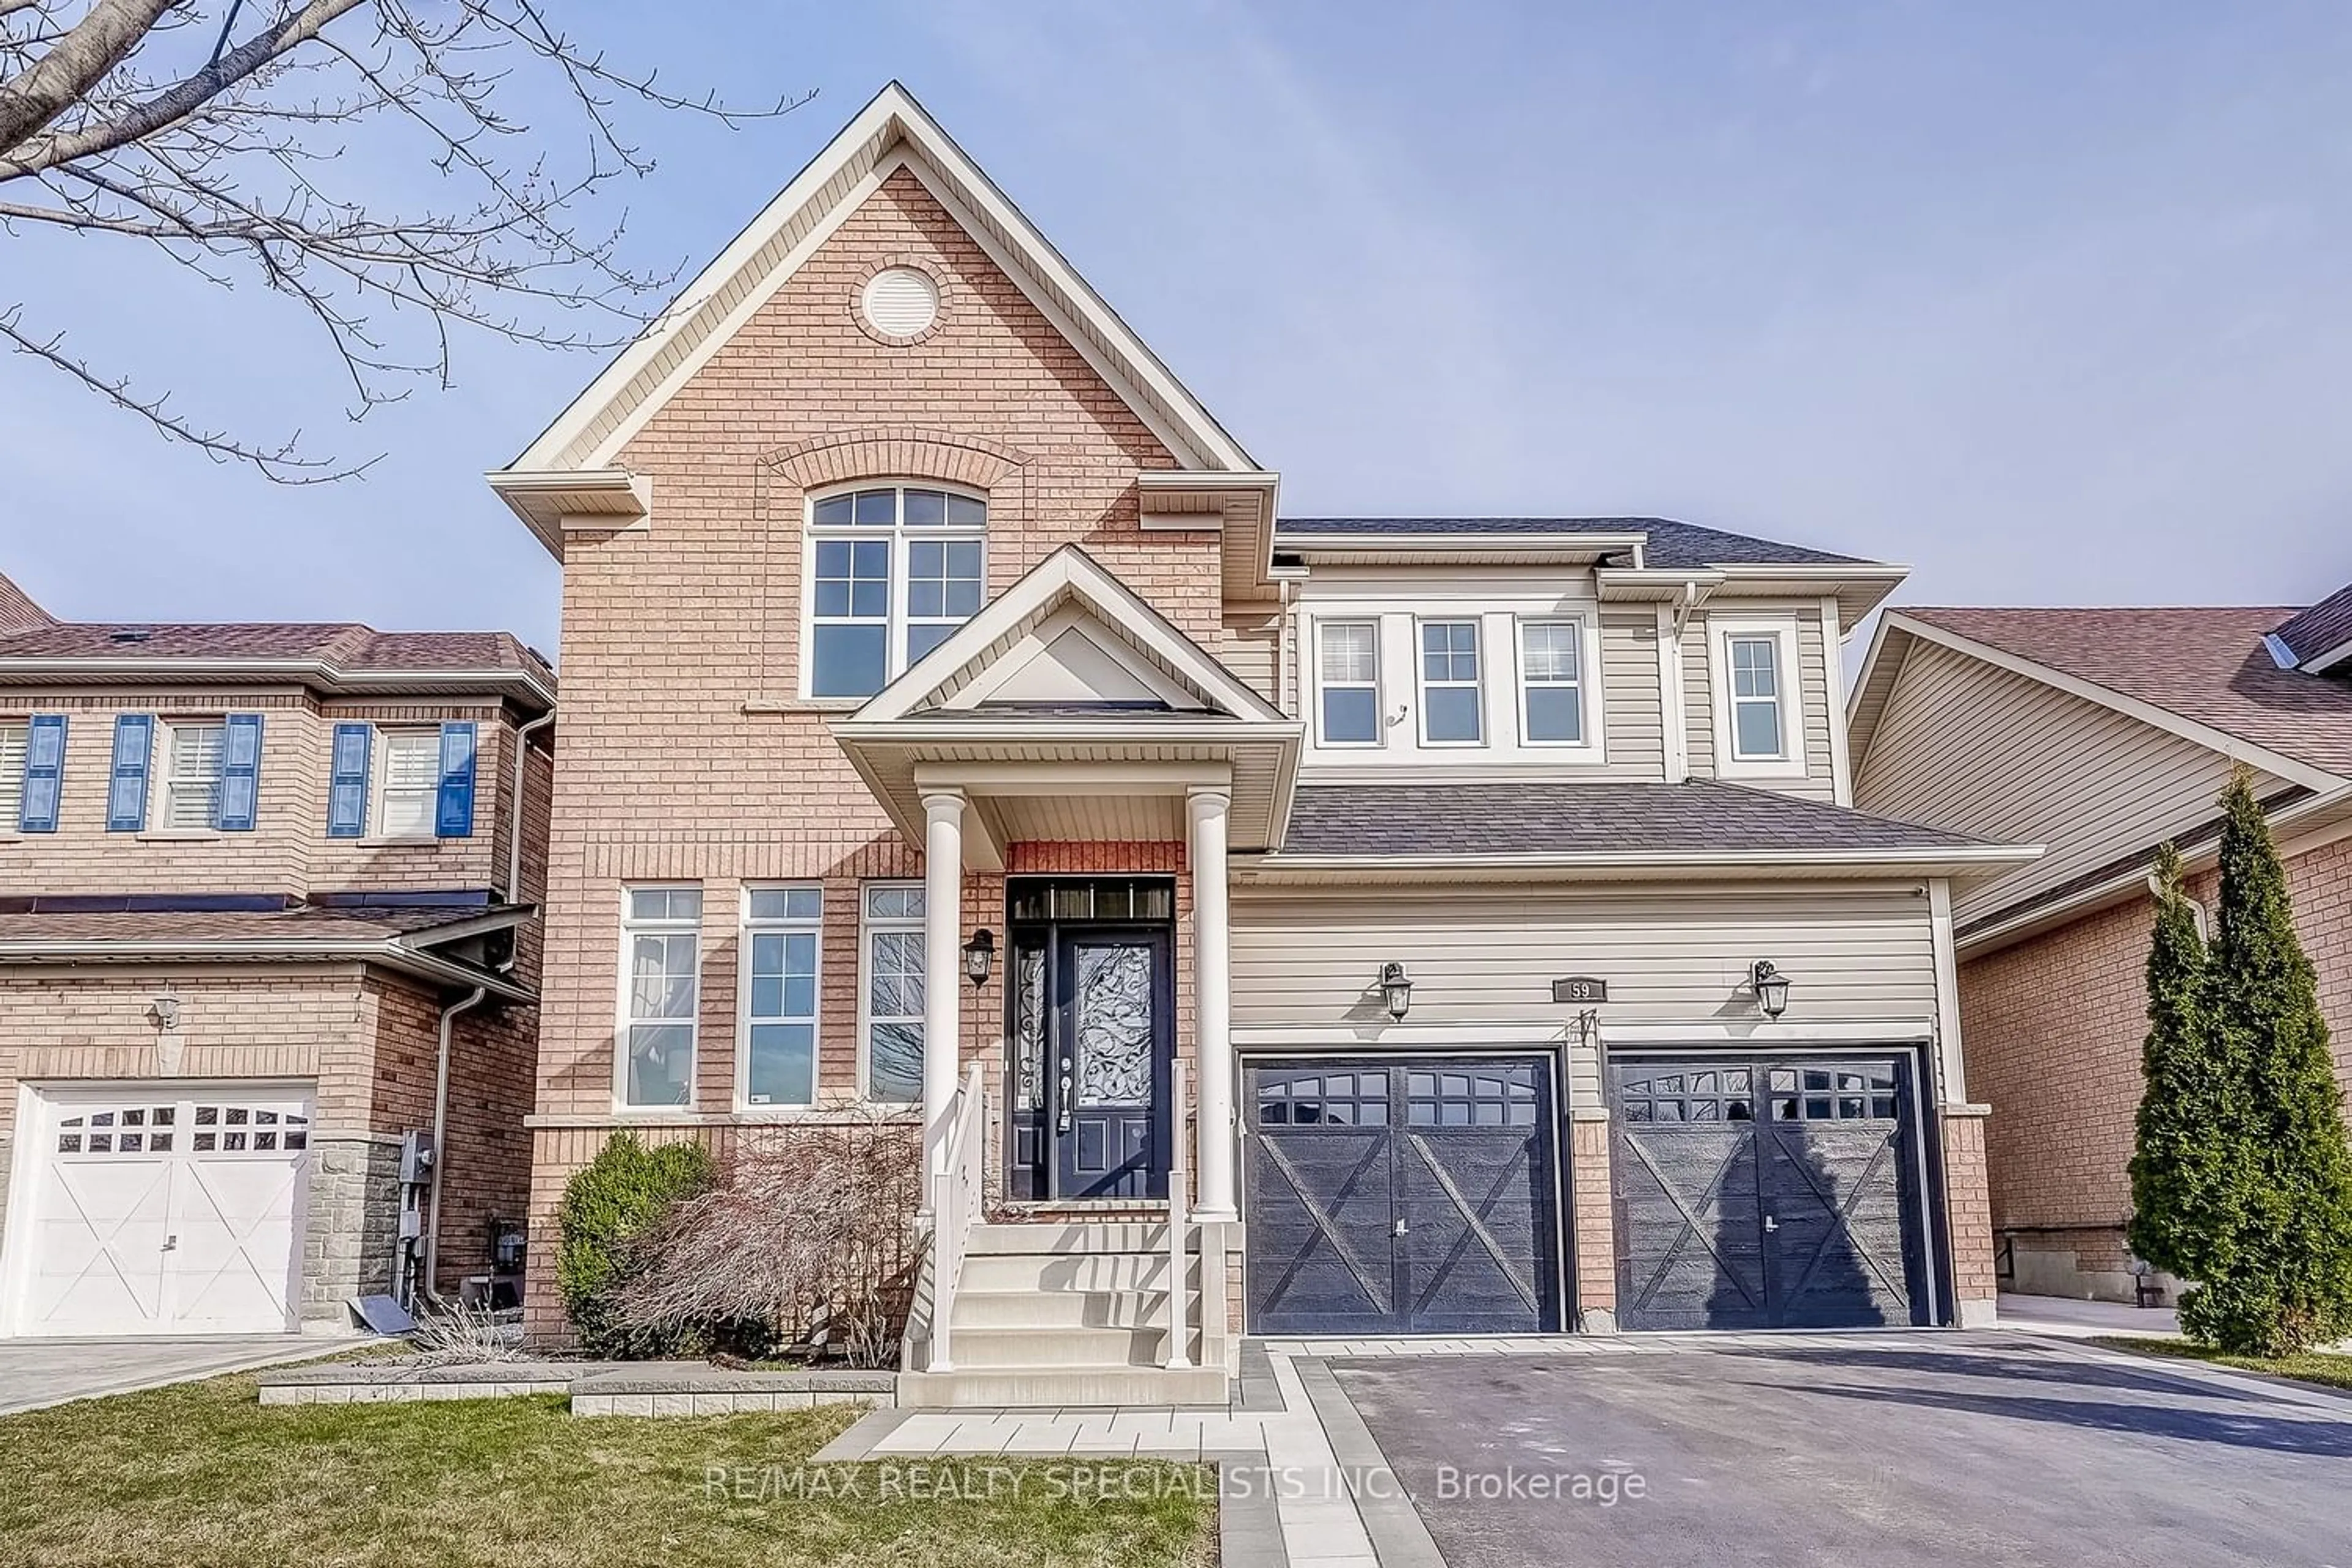 Home with brick exterior material for 59 Trailside Dr, Bradford West Gwillimbury Ontario L3Z 0B9